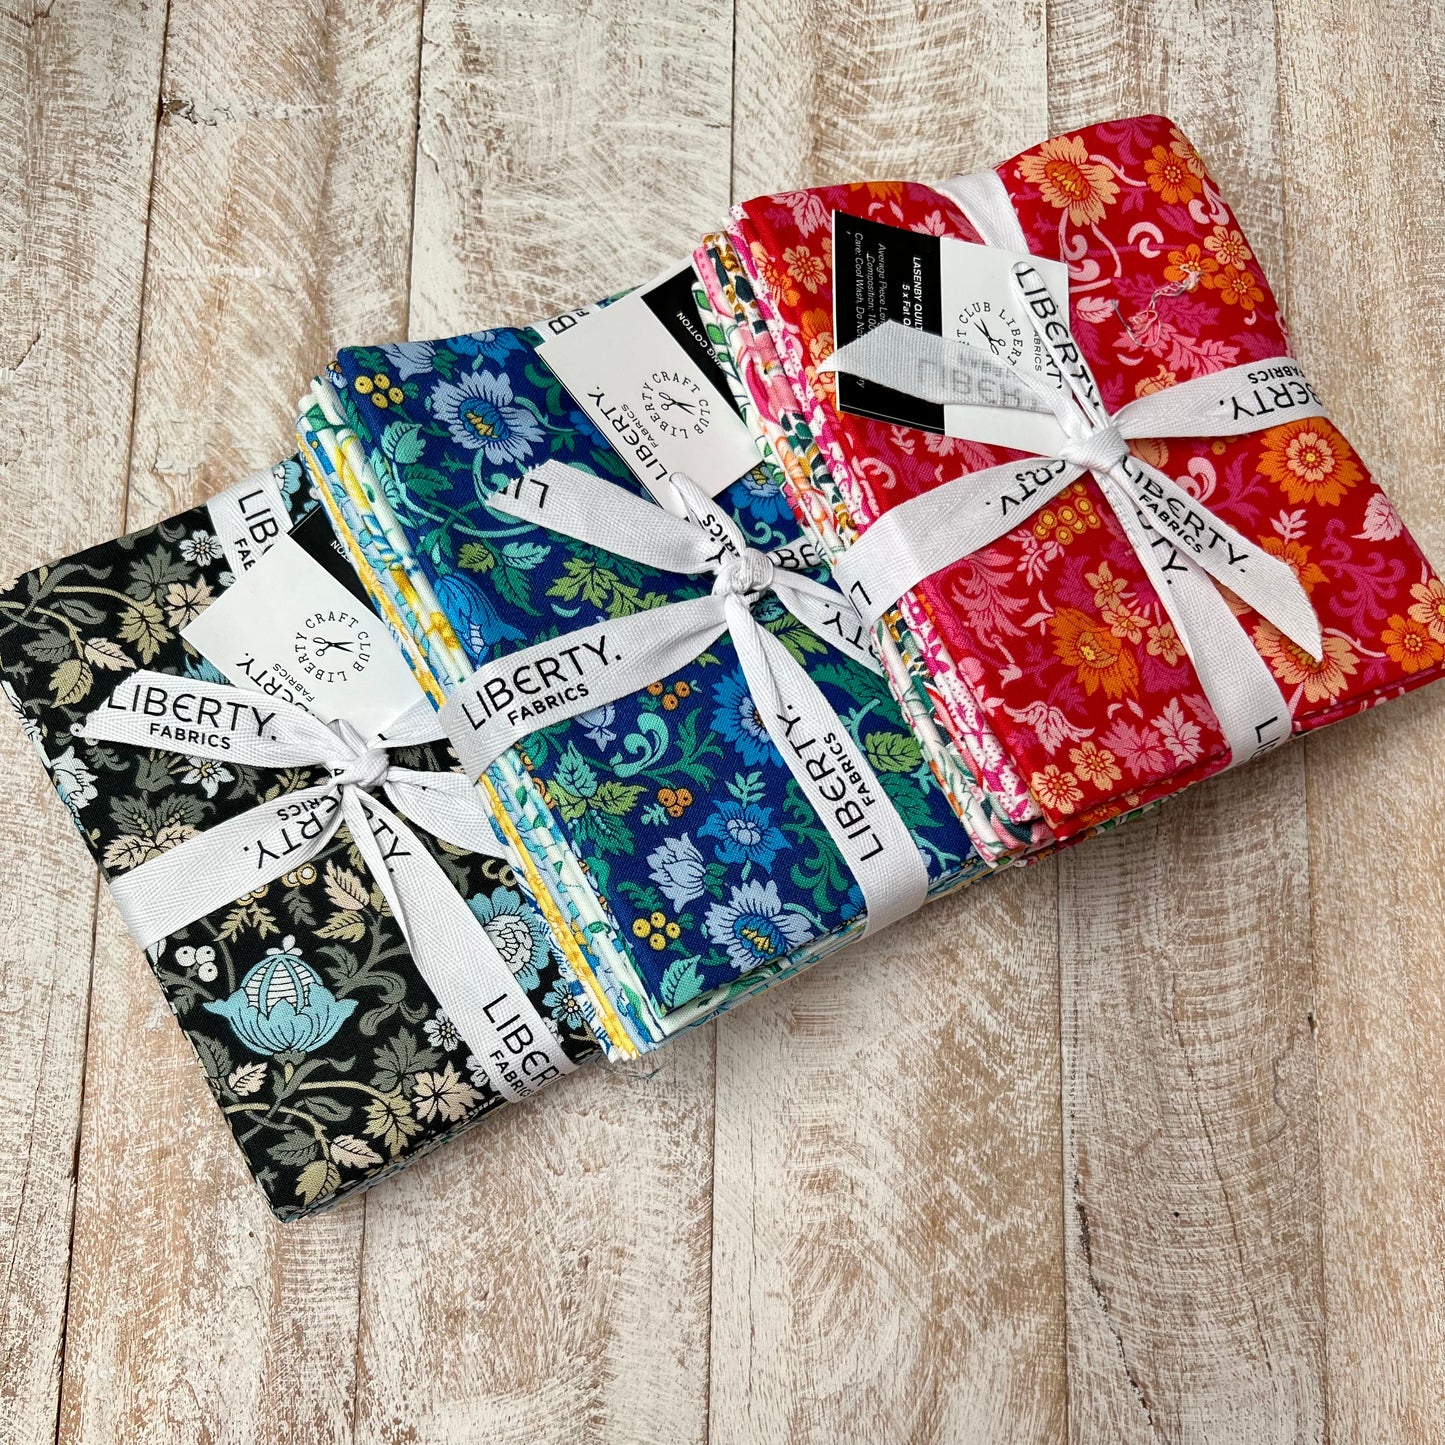 Liberty Fabric Fat Quarter Bundles - The Artists Home Collection